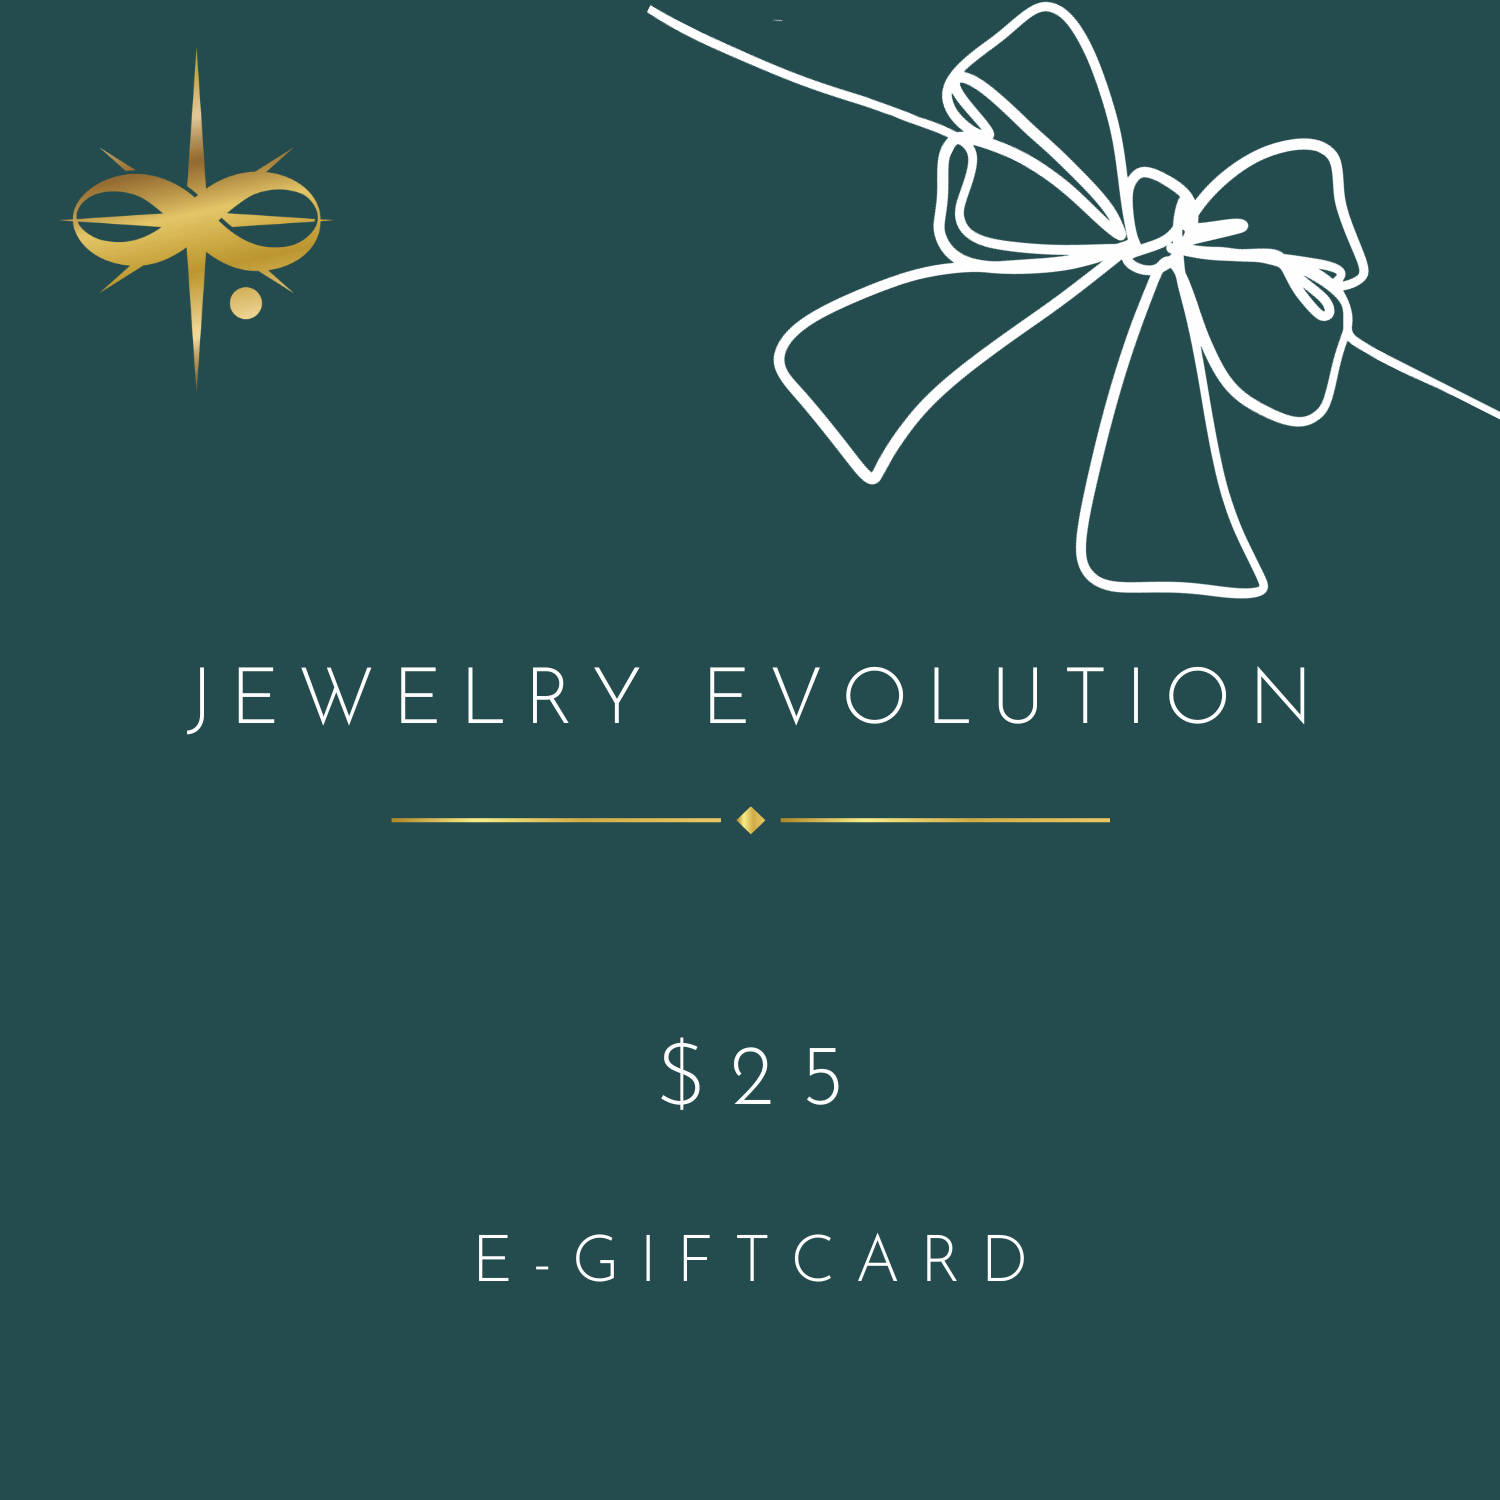 Jewelry Evolution Gift Card $25.00 Gift Card